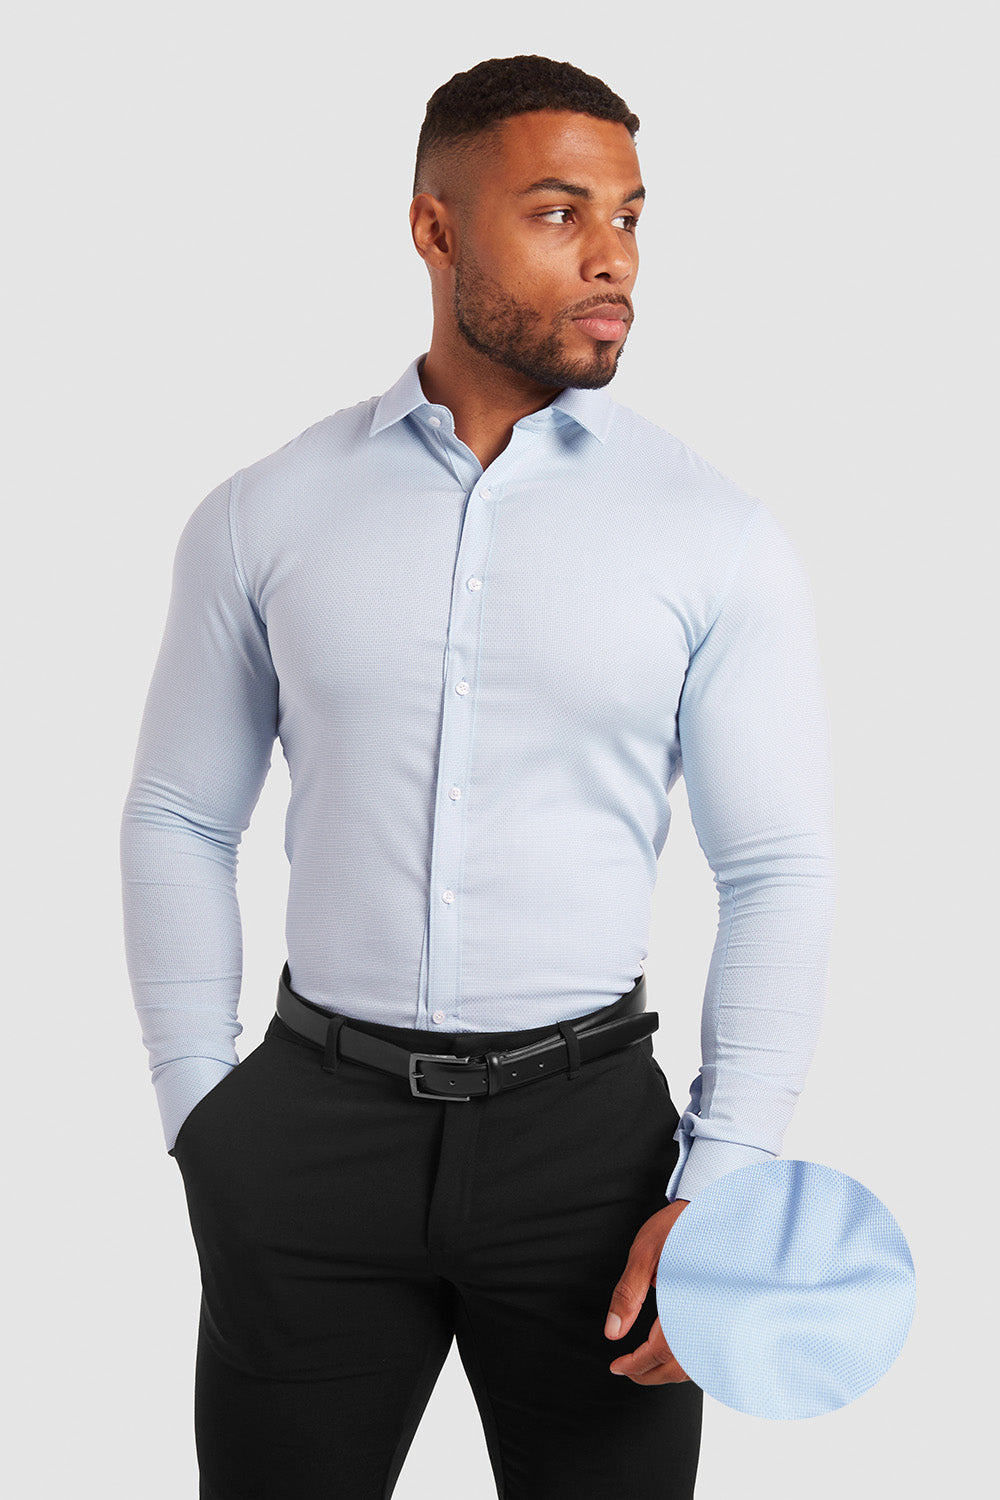 Athletic Fit Dress Shirts - Tailored Athlete - TAILORED ATHLETE